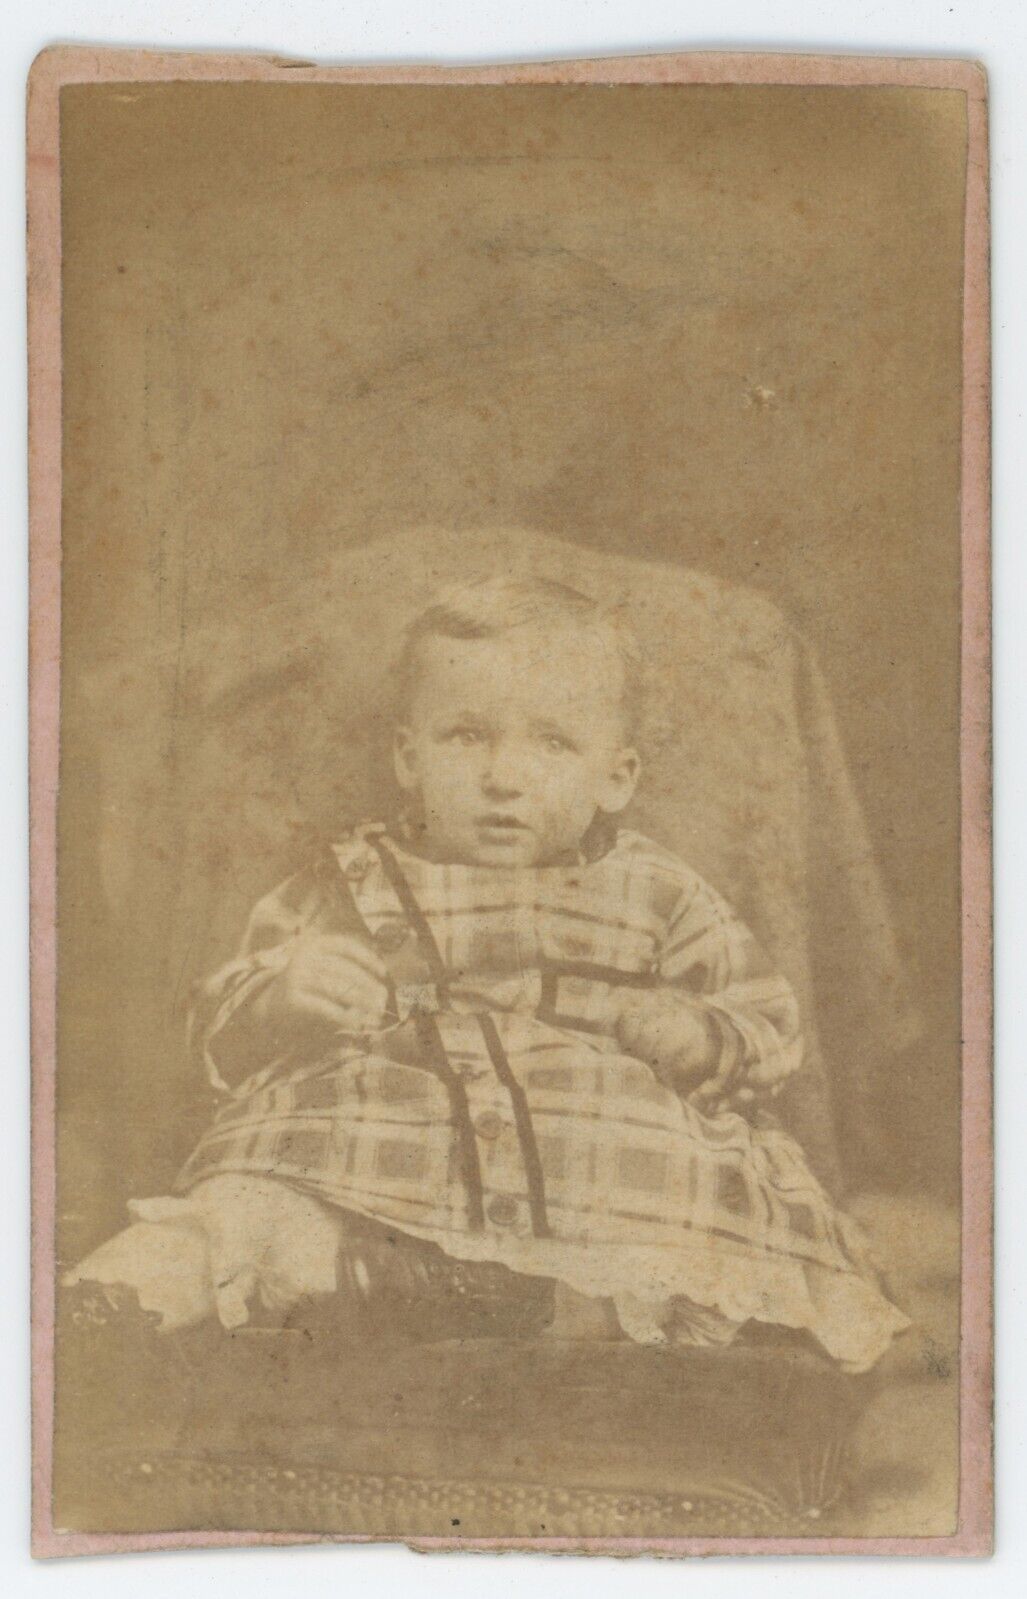 CIRCA 1870'S CDV of Young Child In Plaid Dress Sitting J.W. Sellars Bellaire OH